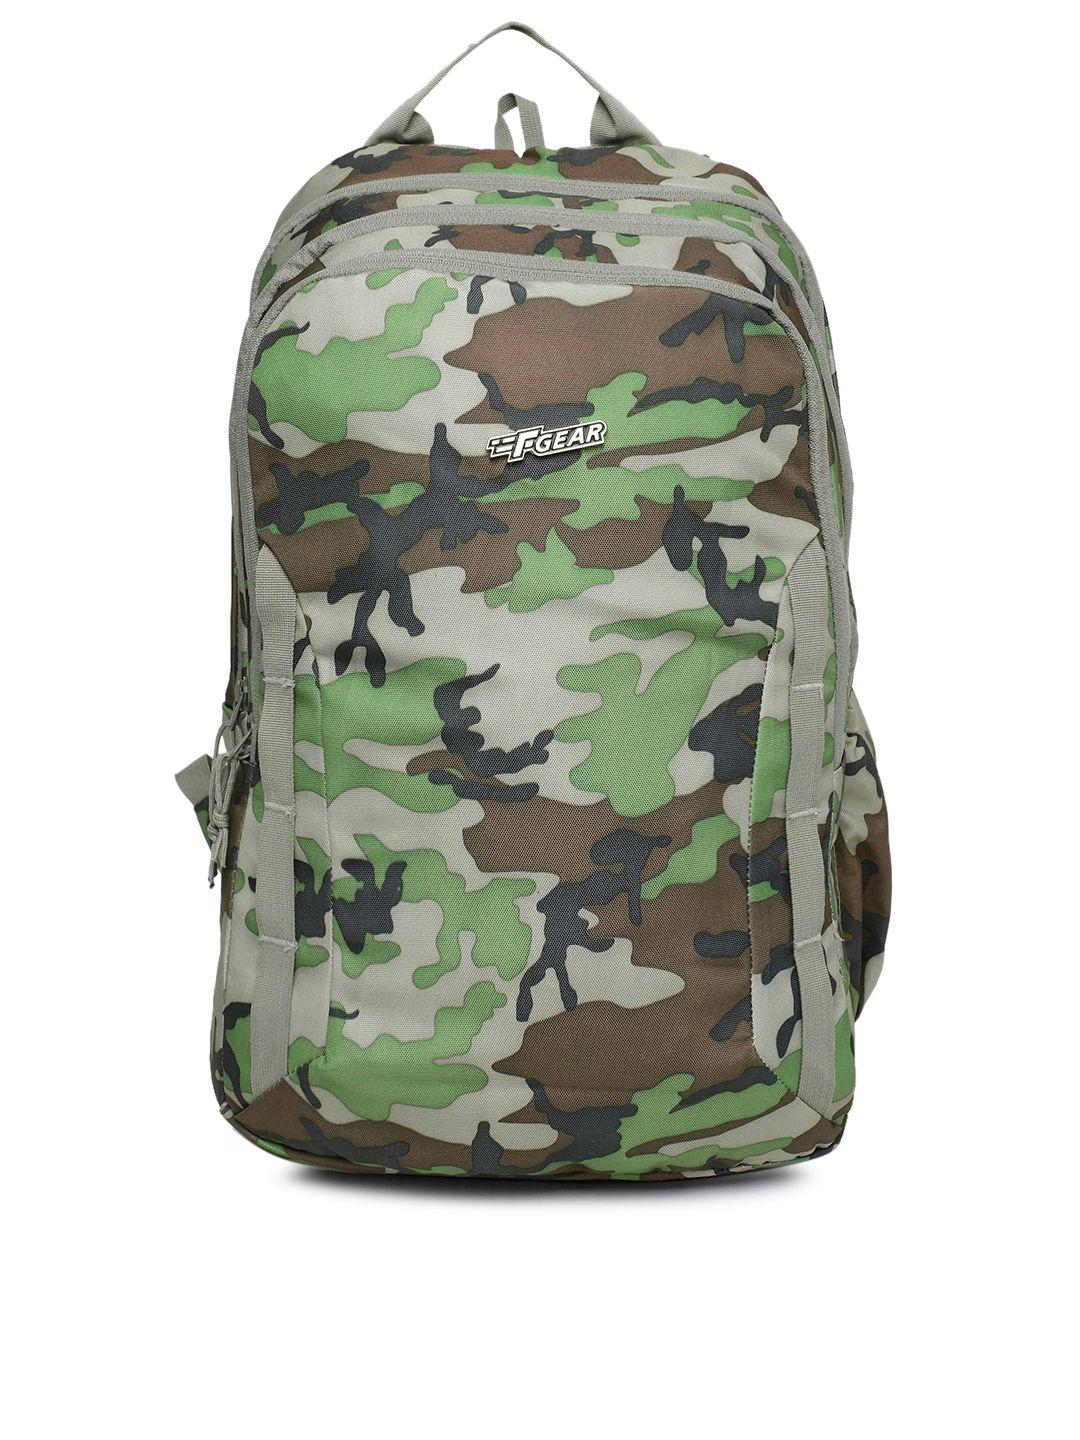 f gear unisex green graphic military raider woodland a camo backpack